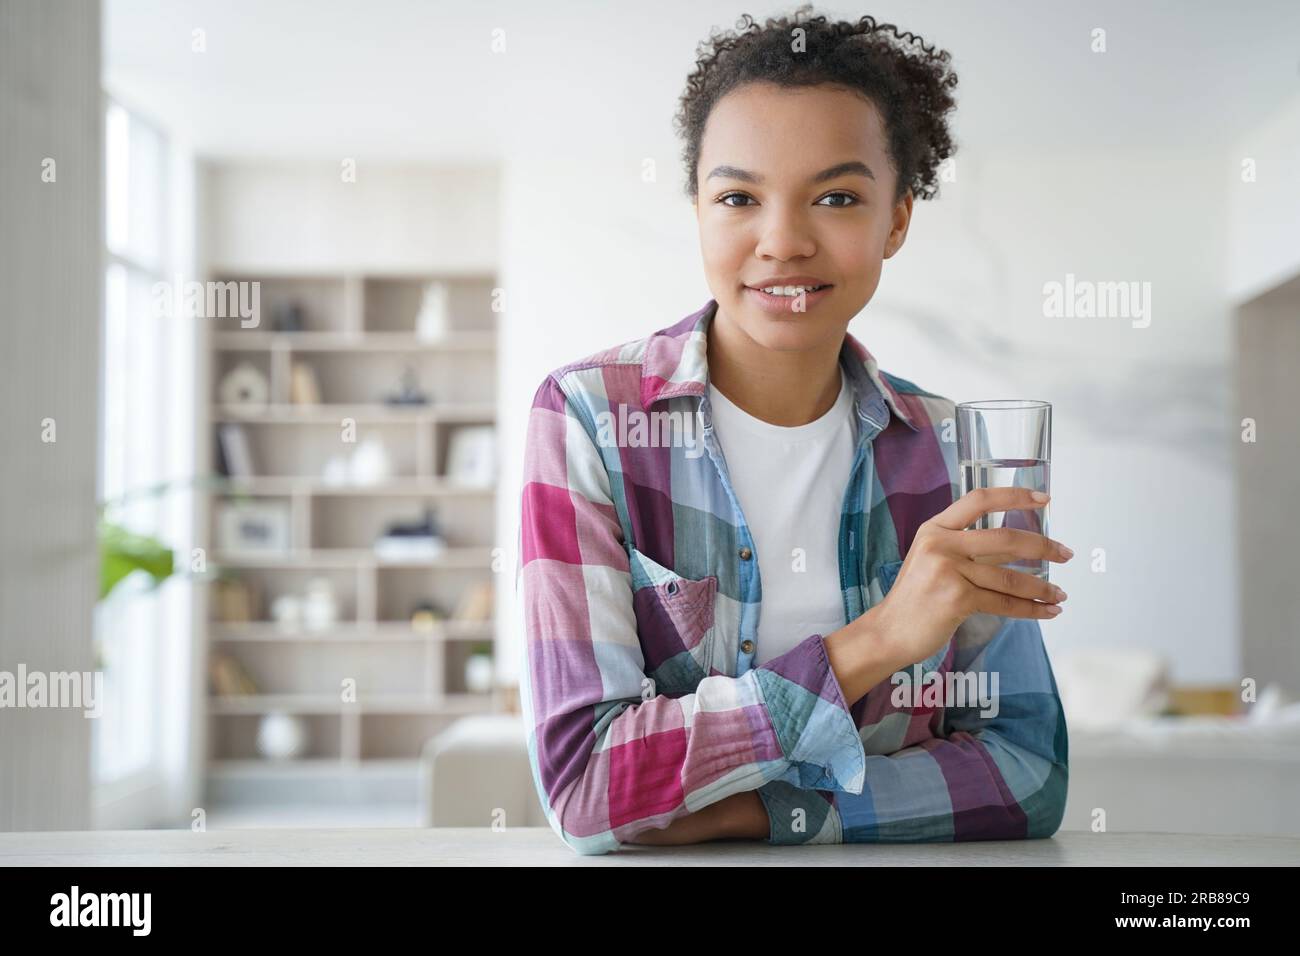 Happy biracial girl at home holds glass of water, promoting healthy lifestyle, smiles for camera. Stock Photo